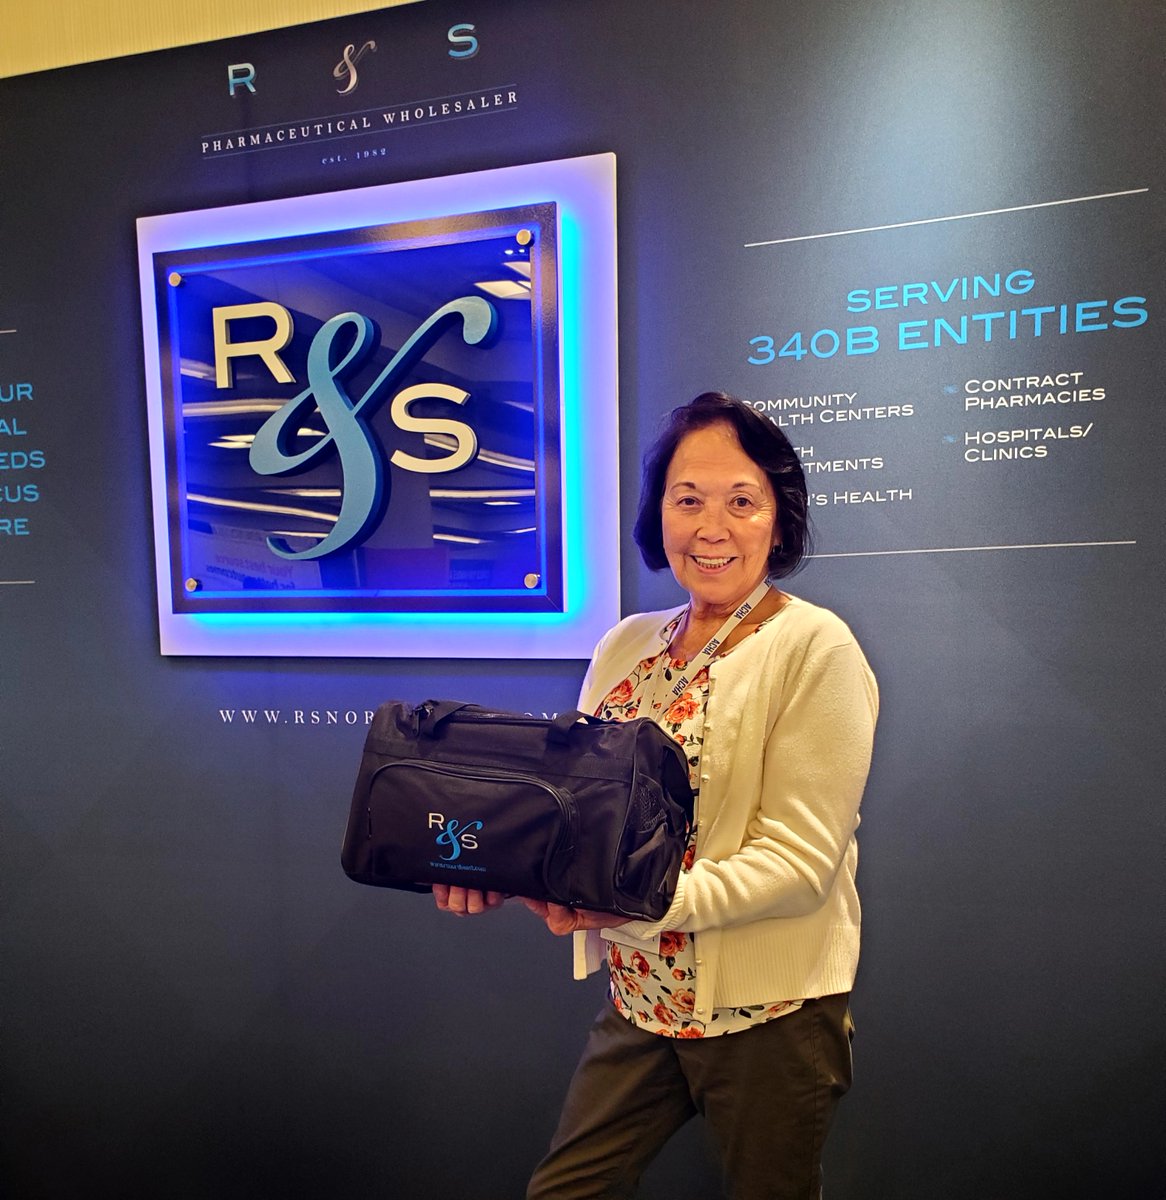 Andrea Hop was the winner of our R&S ACHA2022 Raffle! Thank you for coming by and getting to chat with us Andrea! We loved our time at #ACHA2022 and can't wait for next year!

#ACHA #RSNortheast #ControlCramps #Pharma